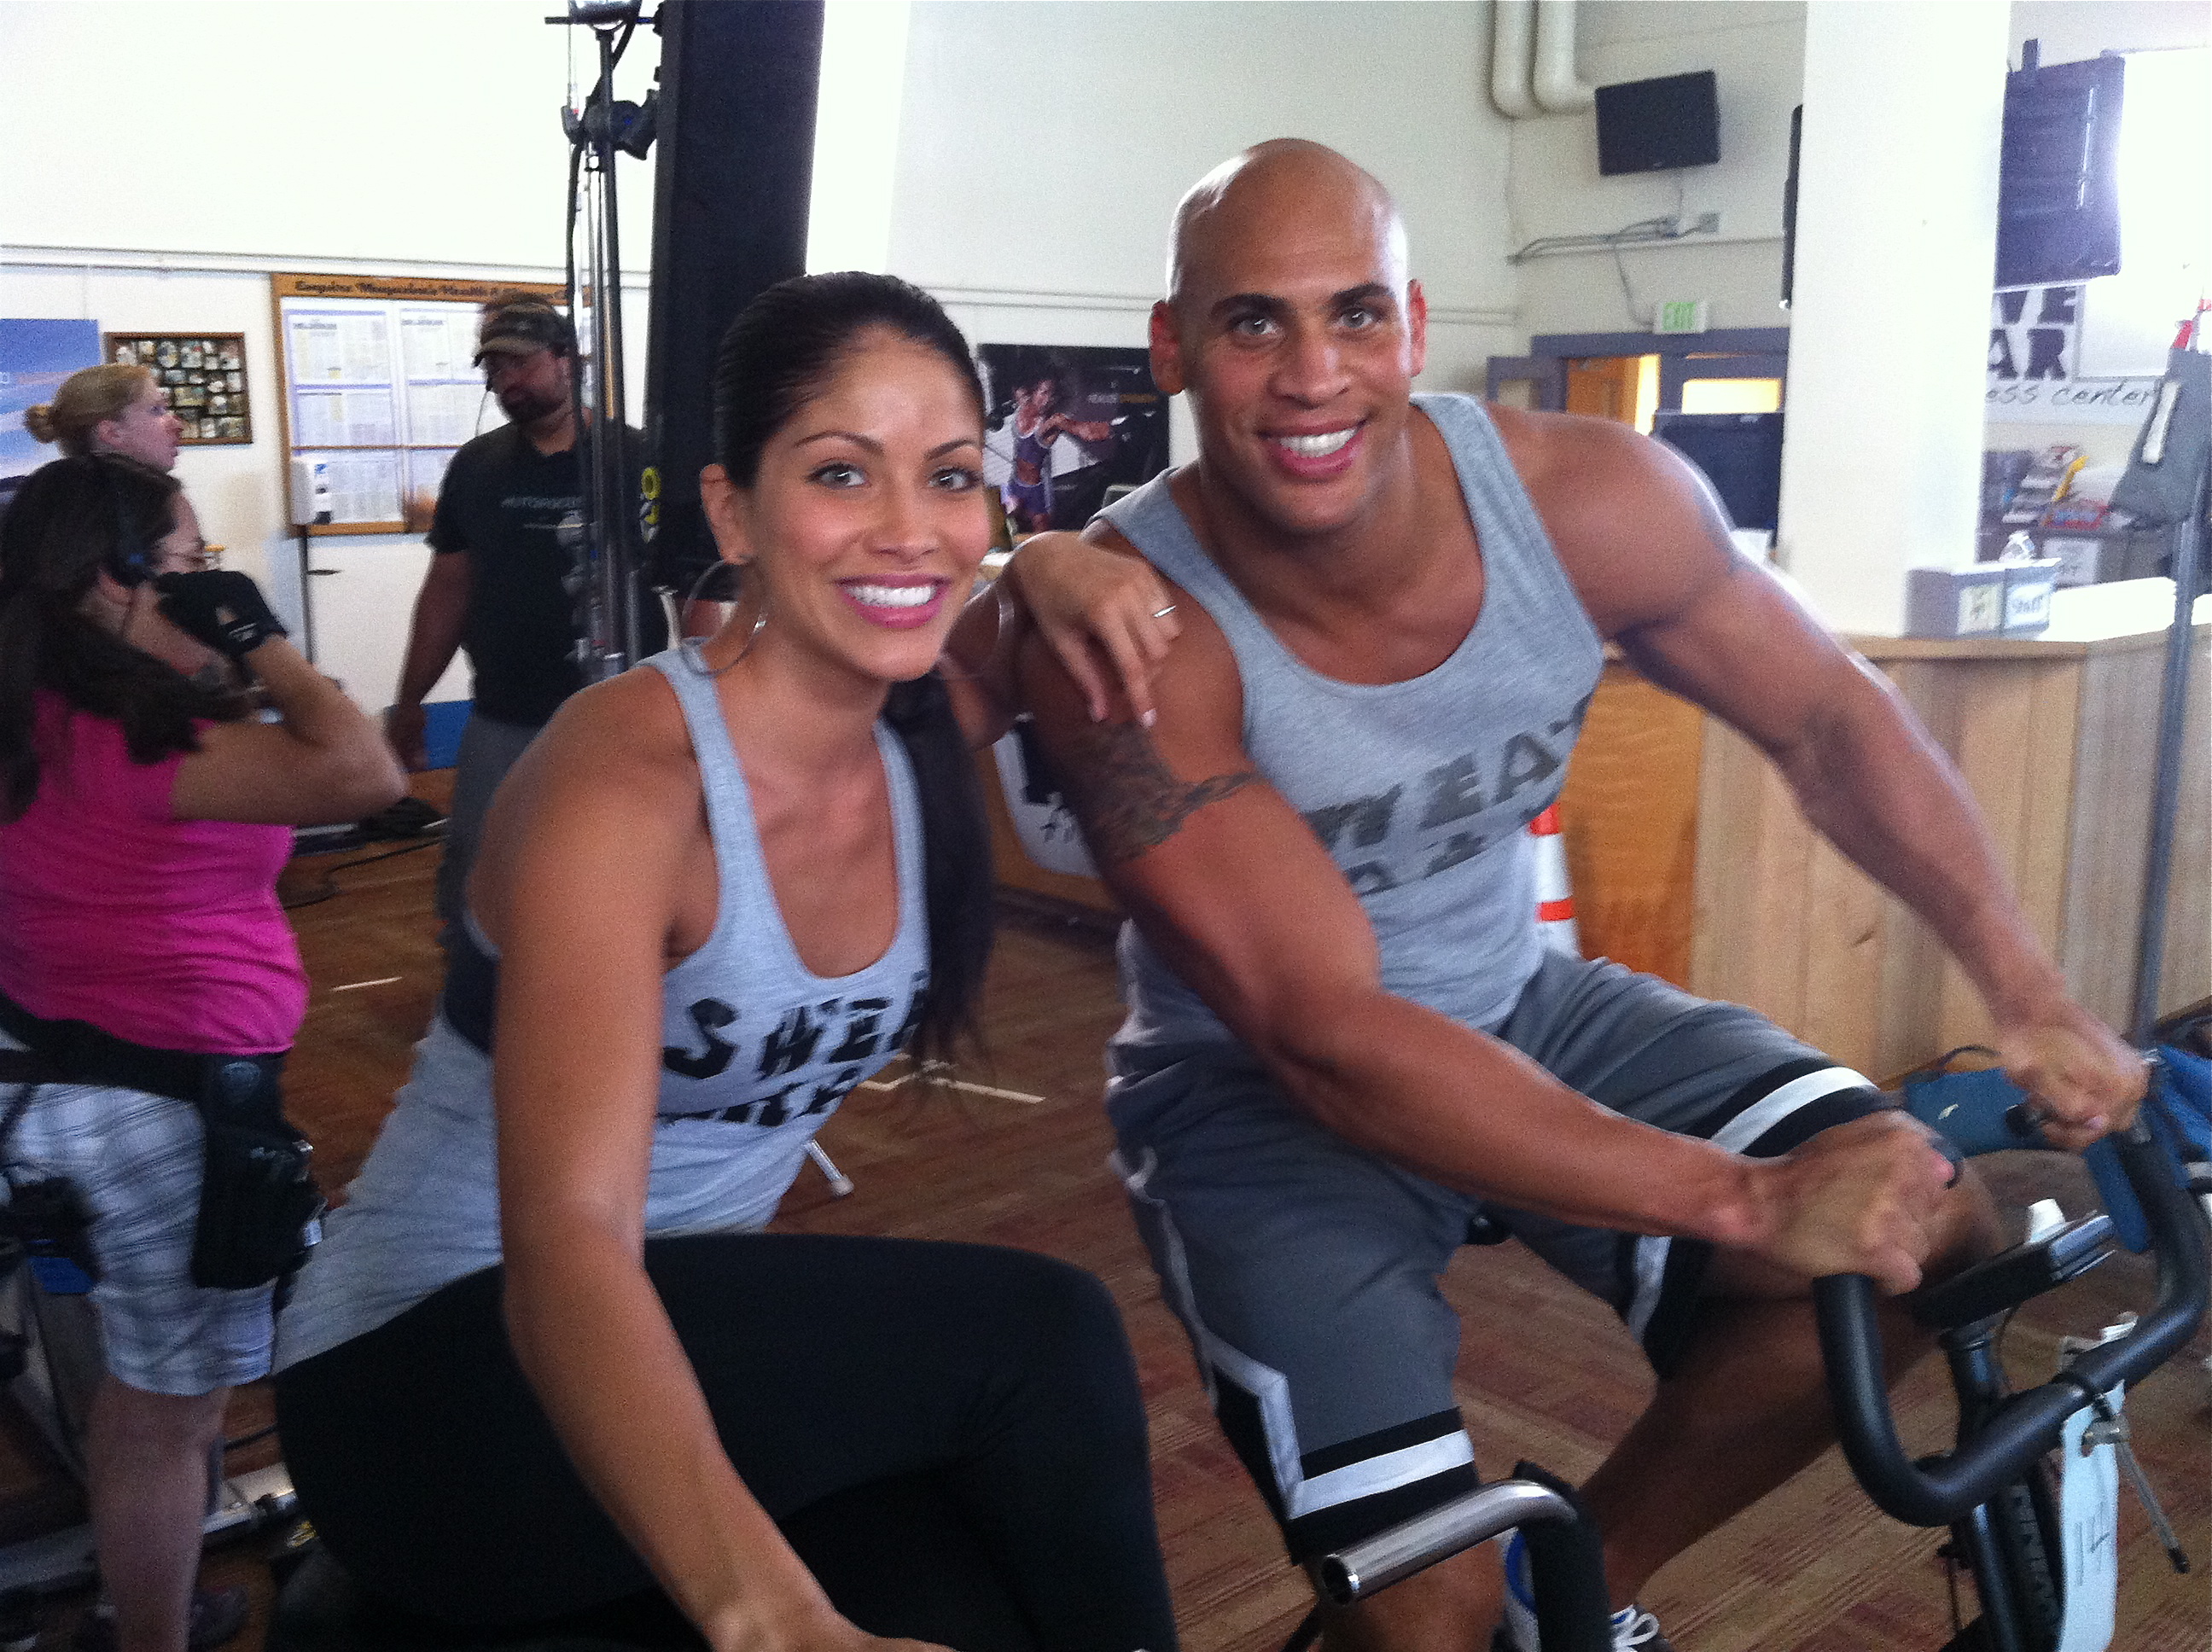 On the set of Dumbbells with Valery Ortiz.